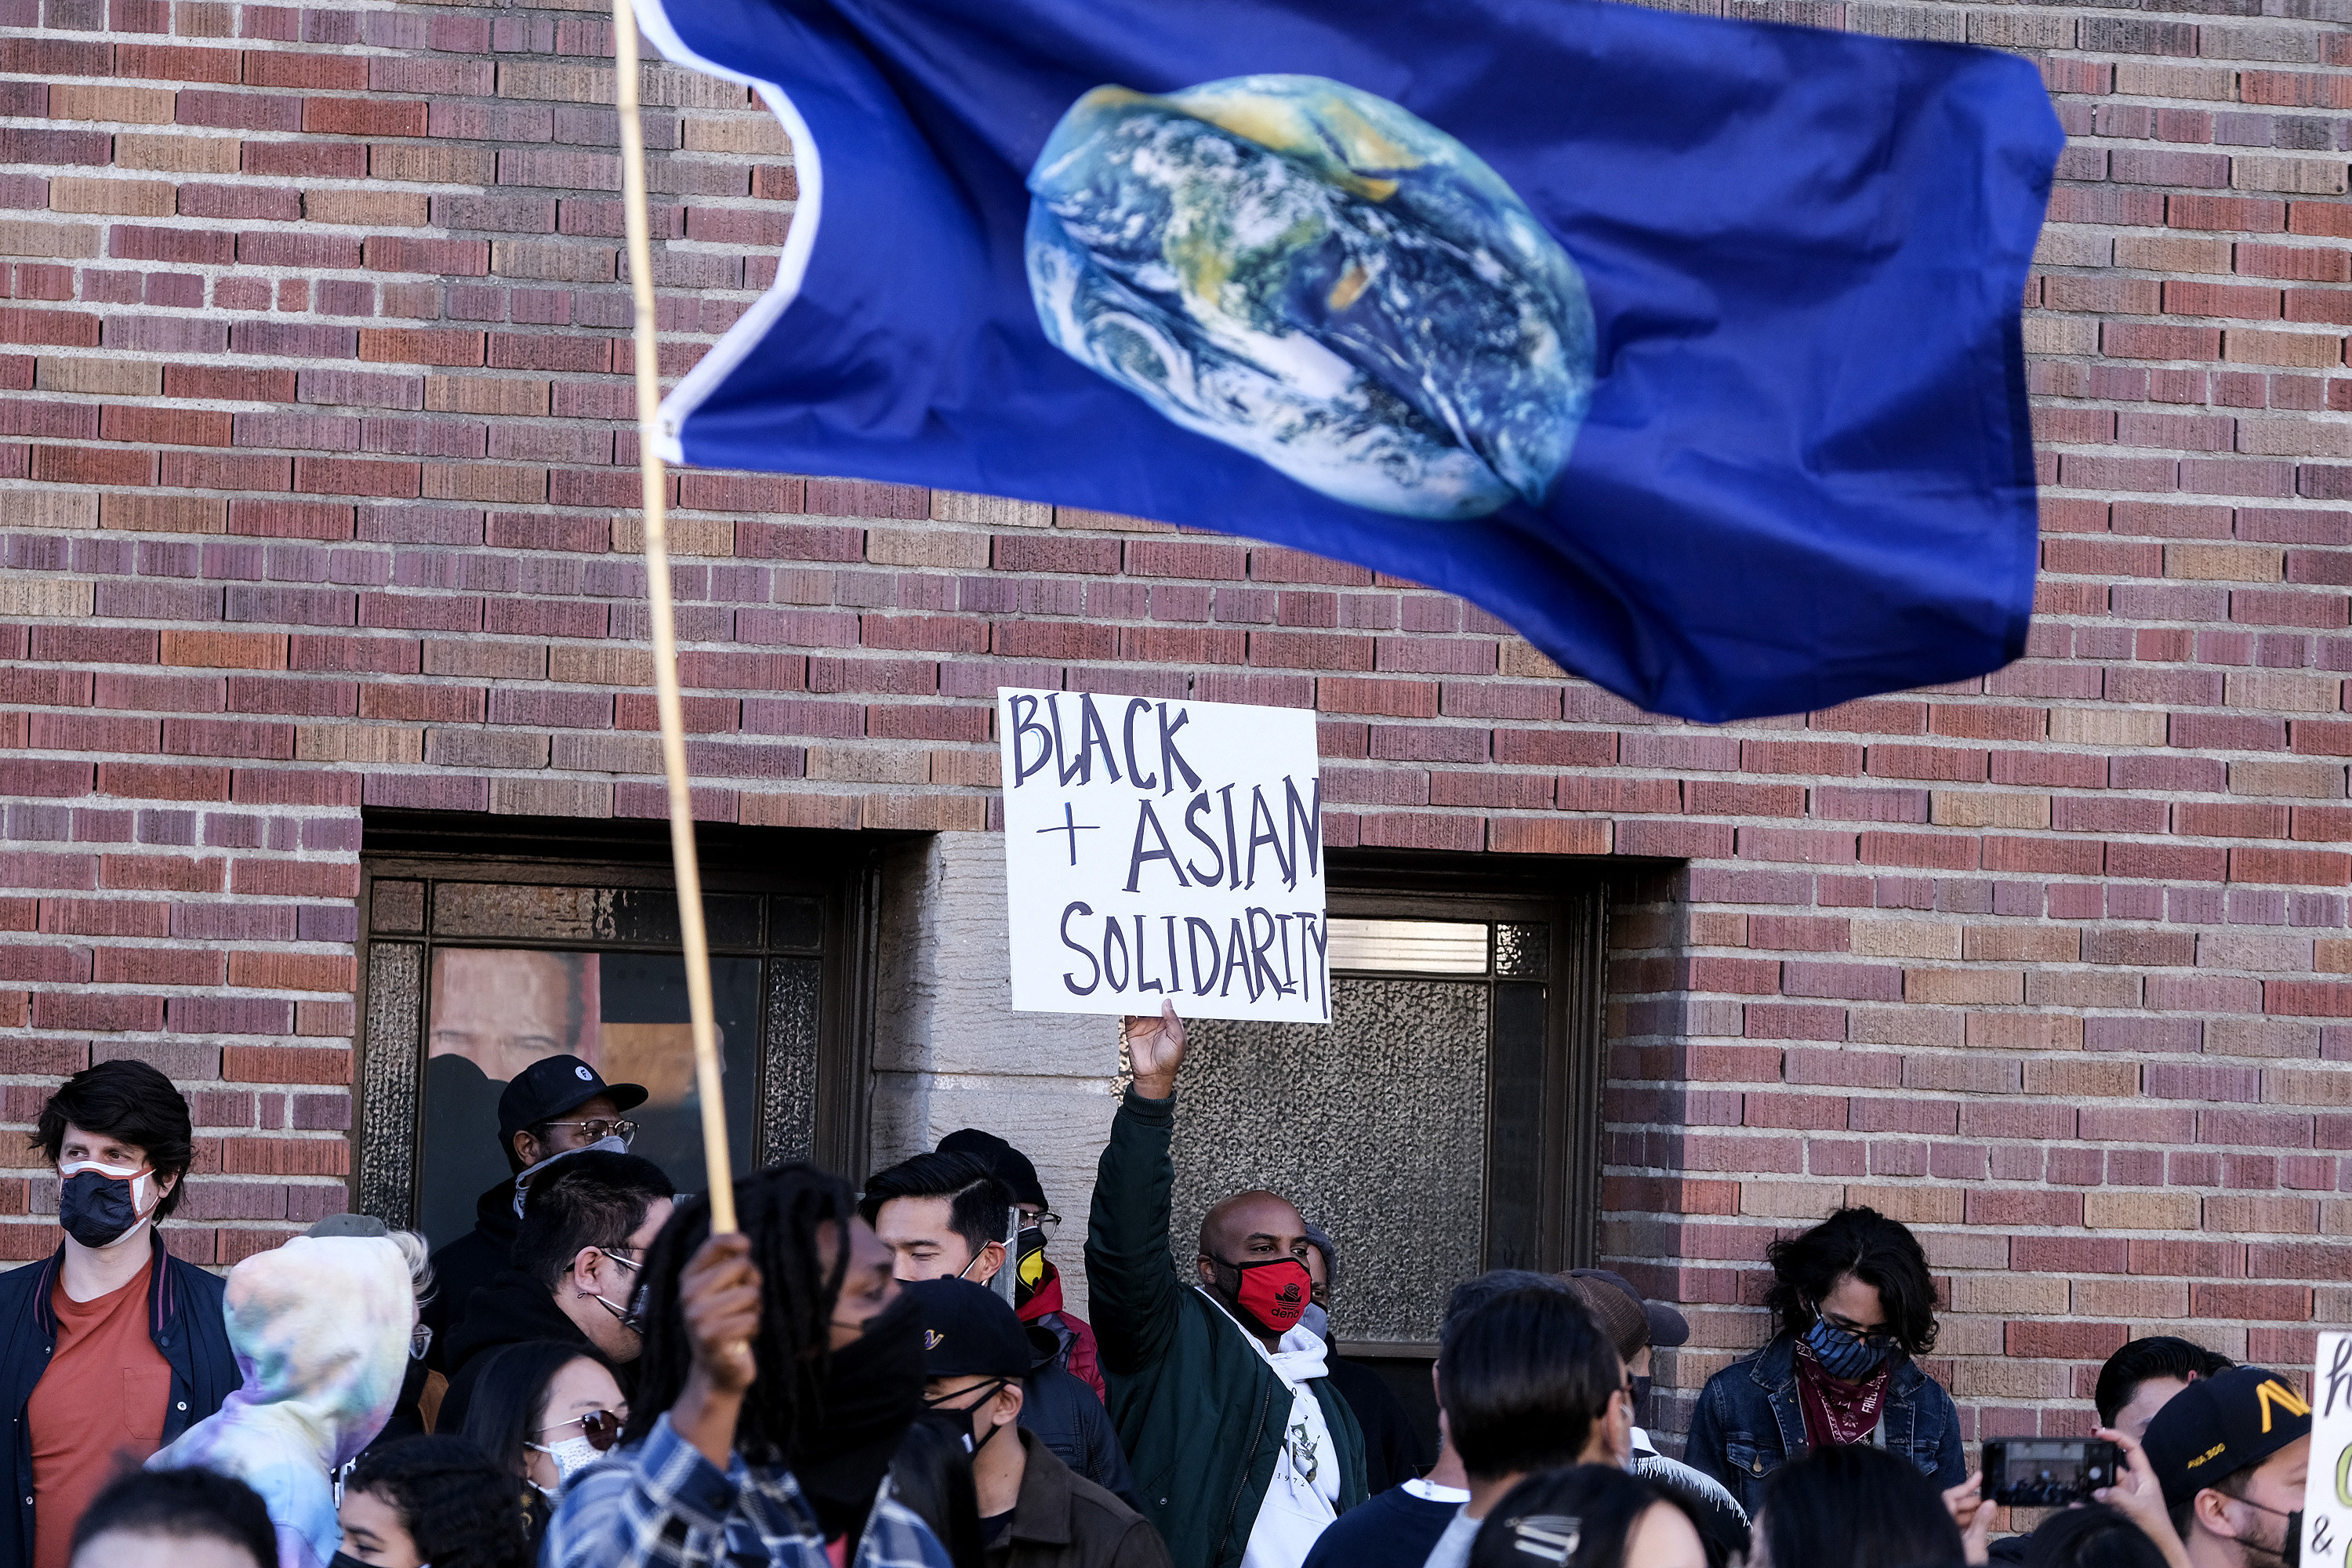 A demonstrator holding a sign for &quot;black &amp; asian solidarity&quot; in a crowd near a person waving a flag with a picture of the Earth